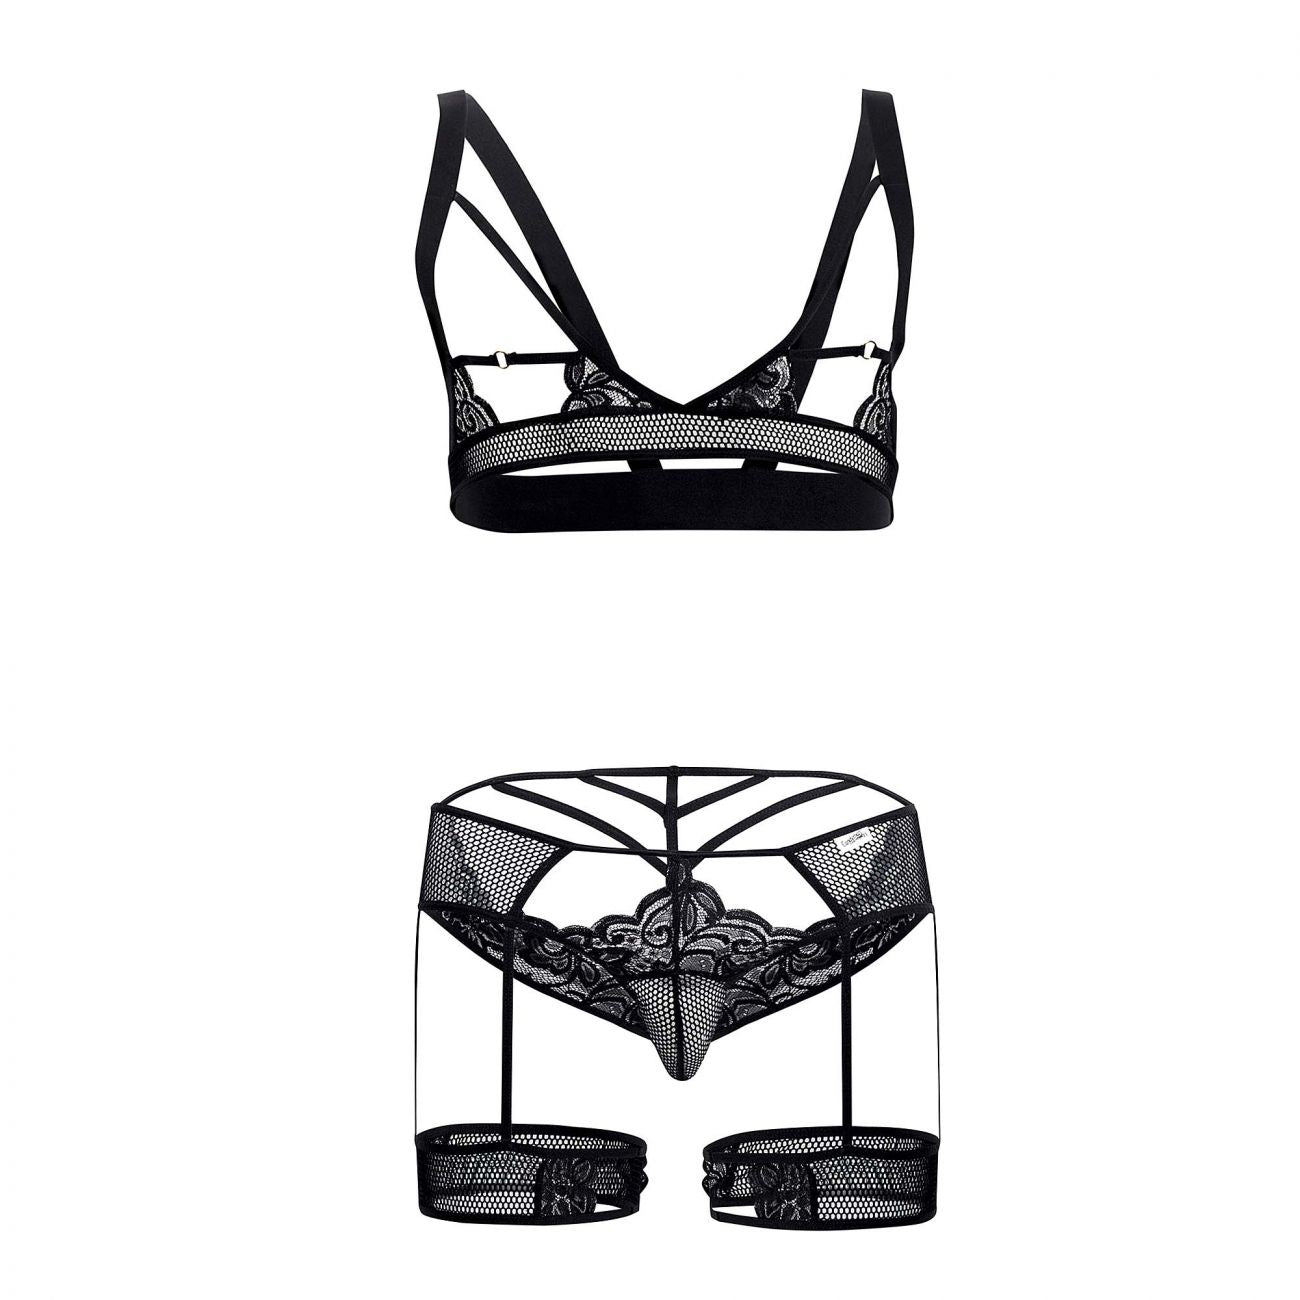 CandyMan 99527 Cut-Out Top and Garter Thongs Set Black